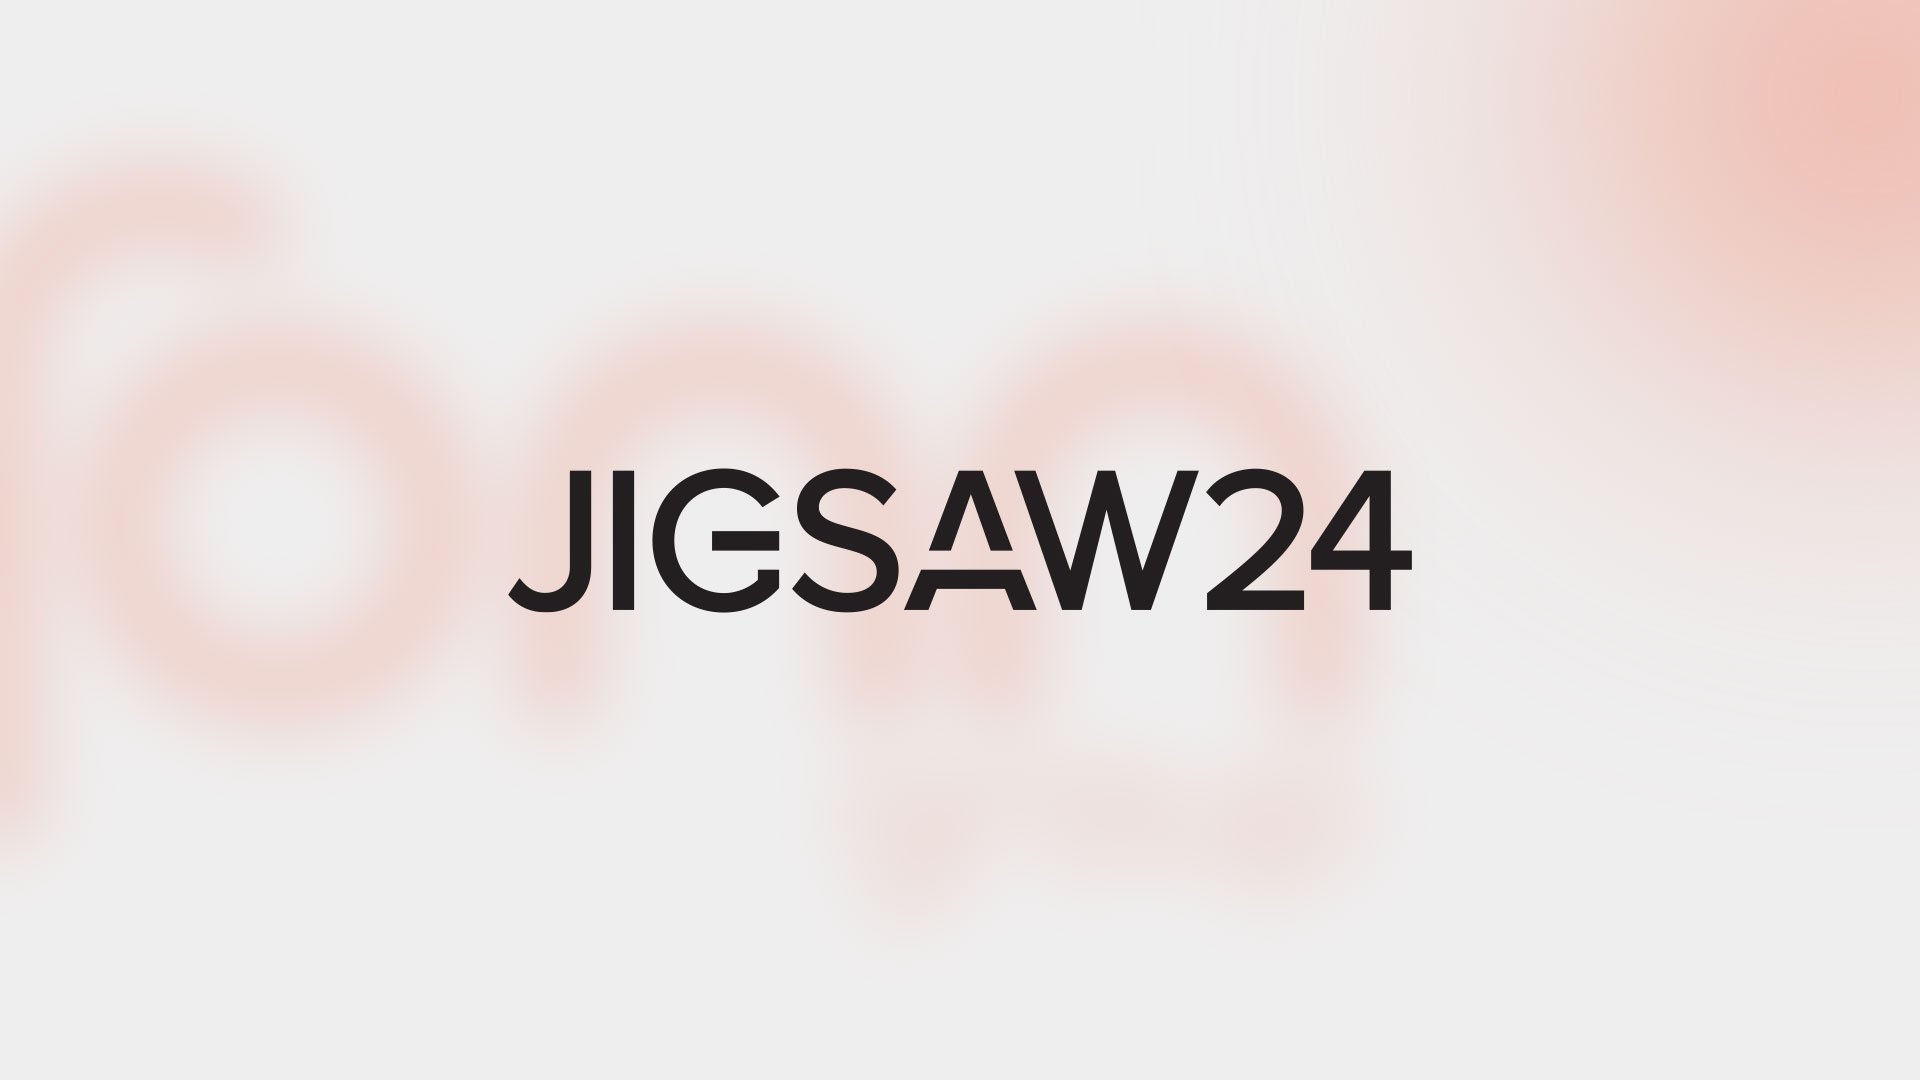 Fonn Group signs partner agreement with UK based Jigsaw24 for Mimir and DiNA